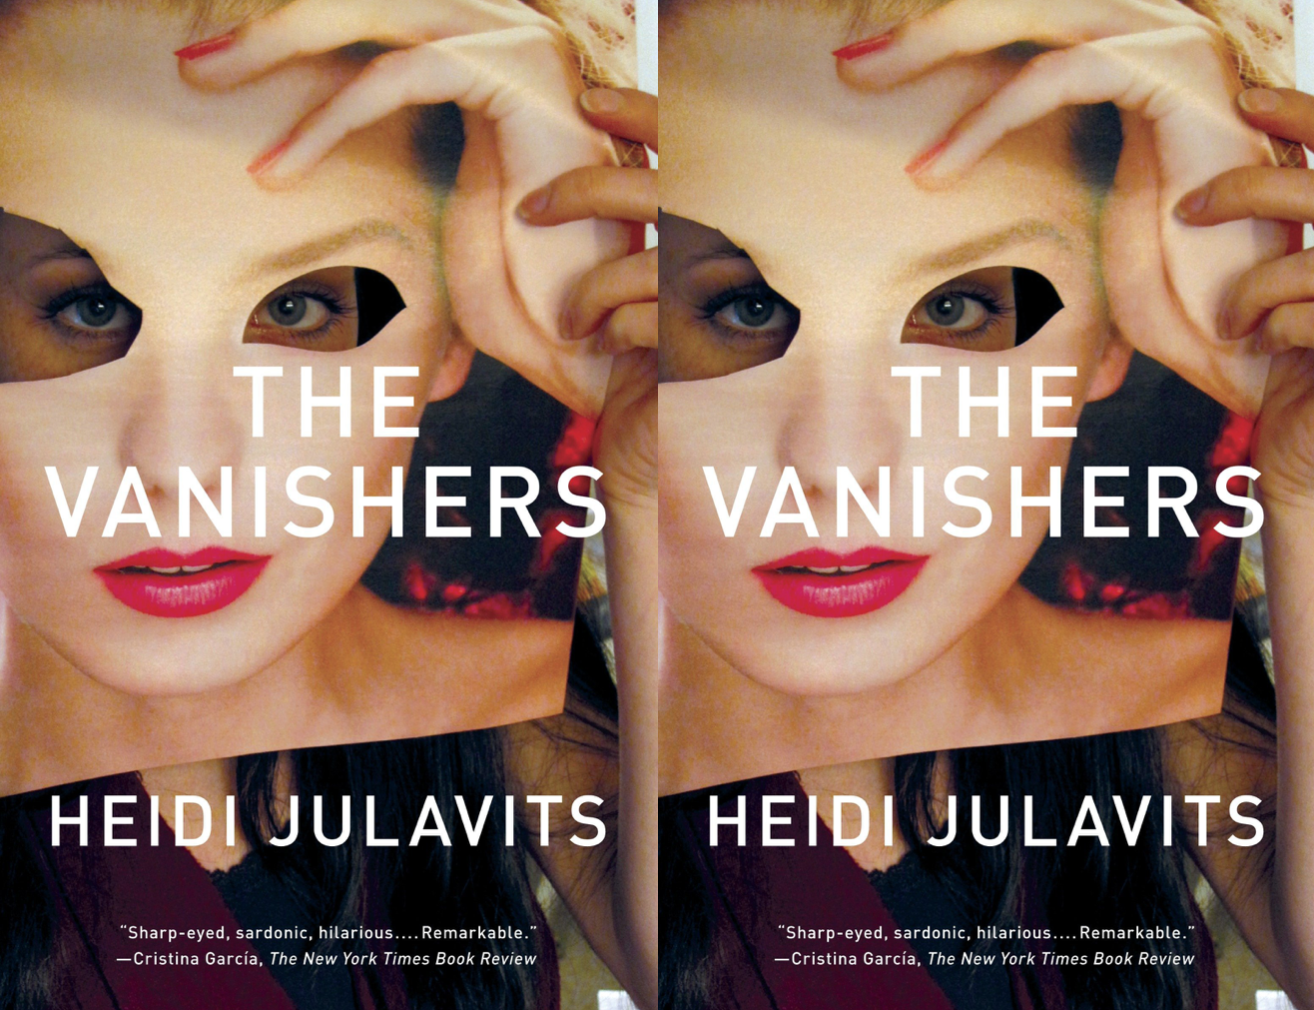 Cover art for The Vanishers by Heidi Julavits